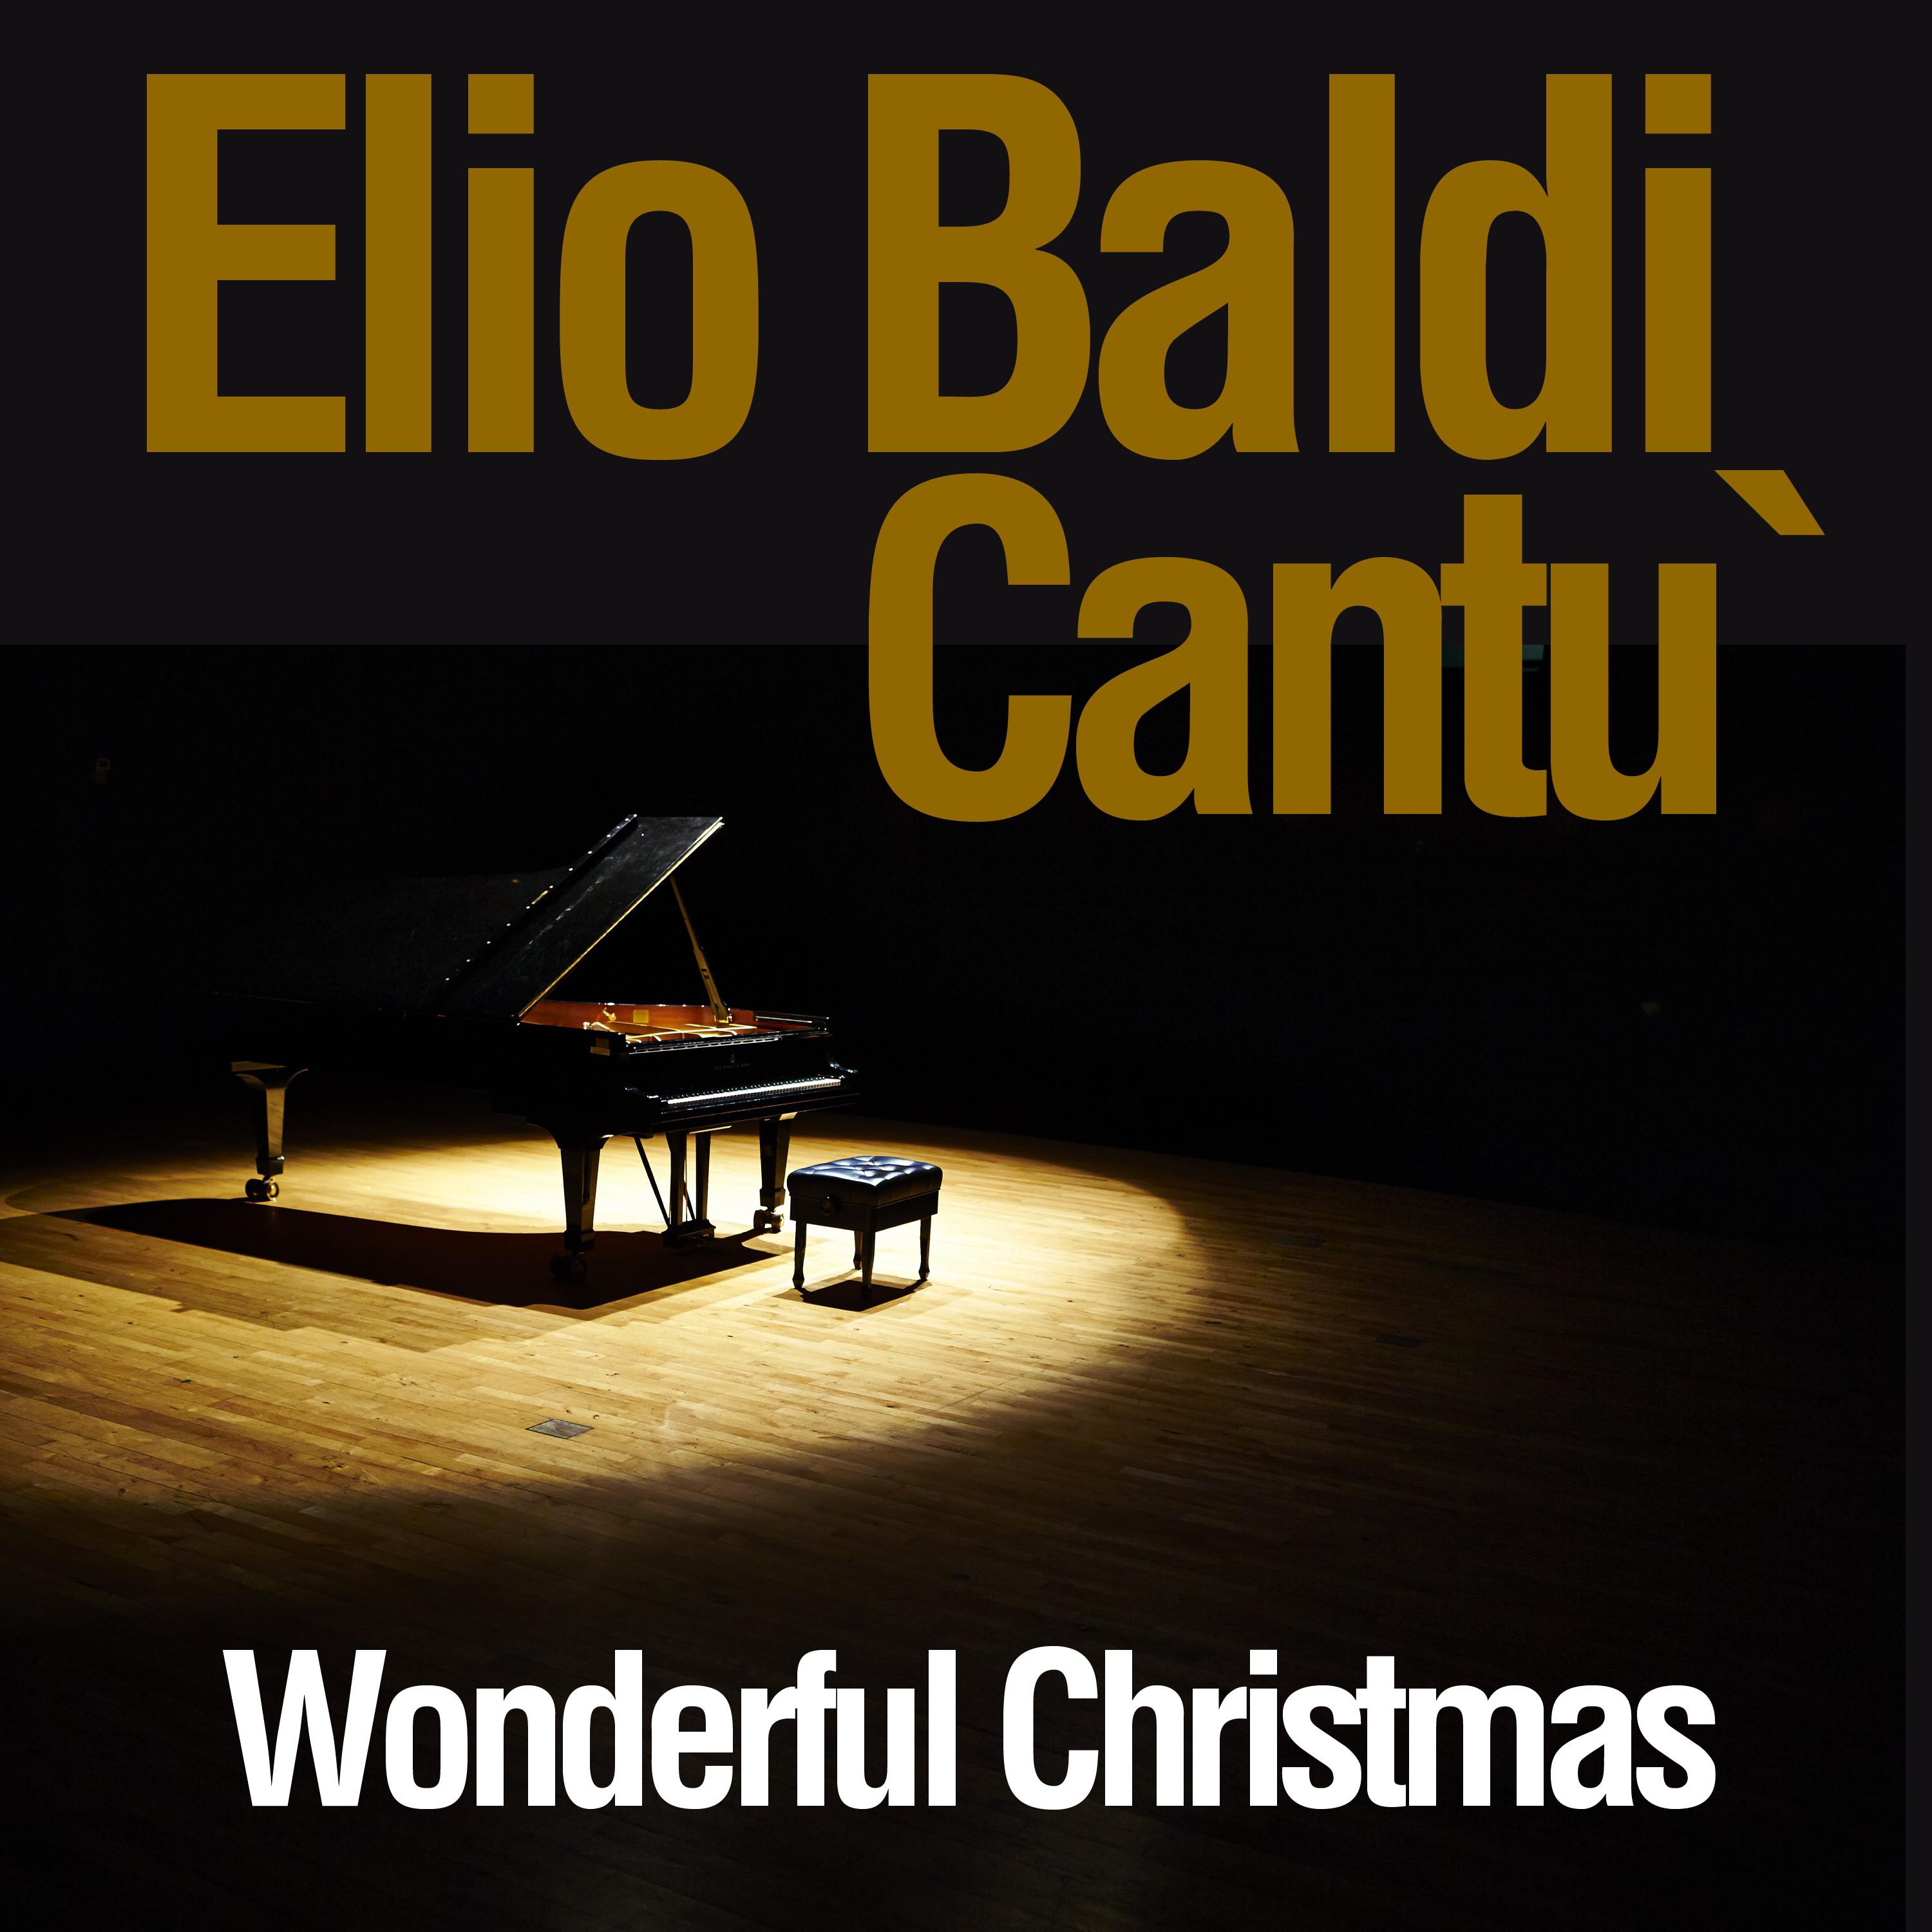 Elio Baldi Cantù - The Christmas Song (Chestnuts Roasting on an Open Fire)